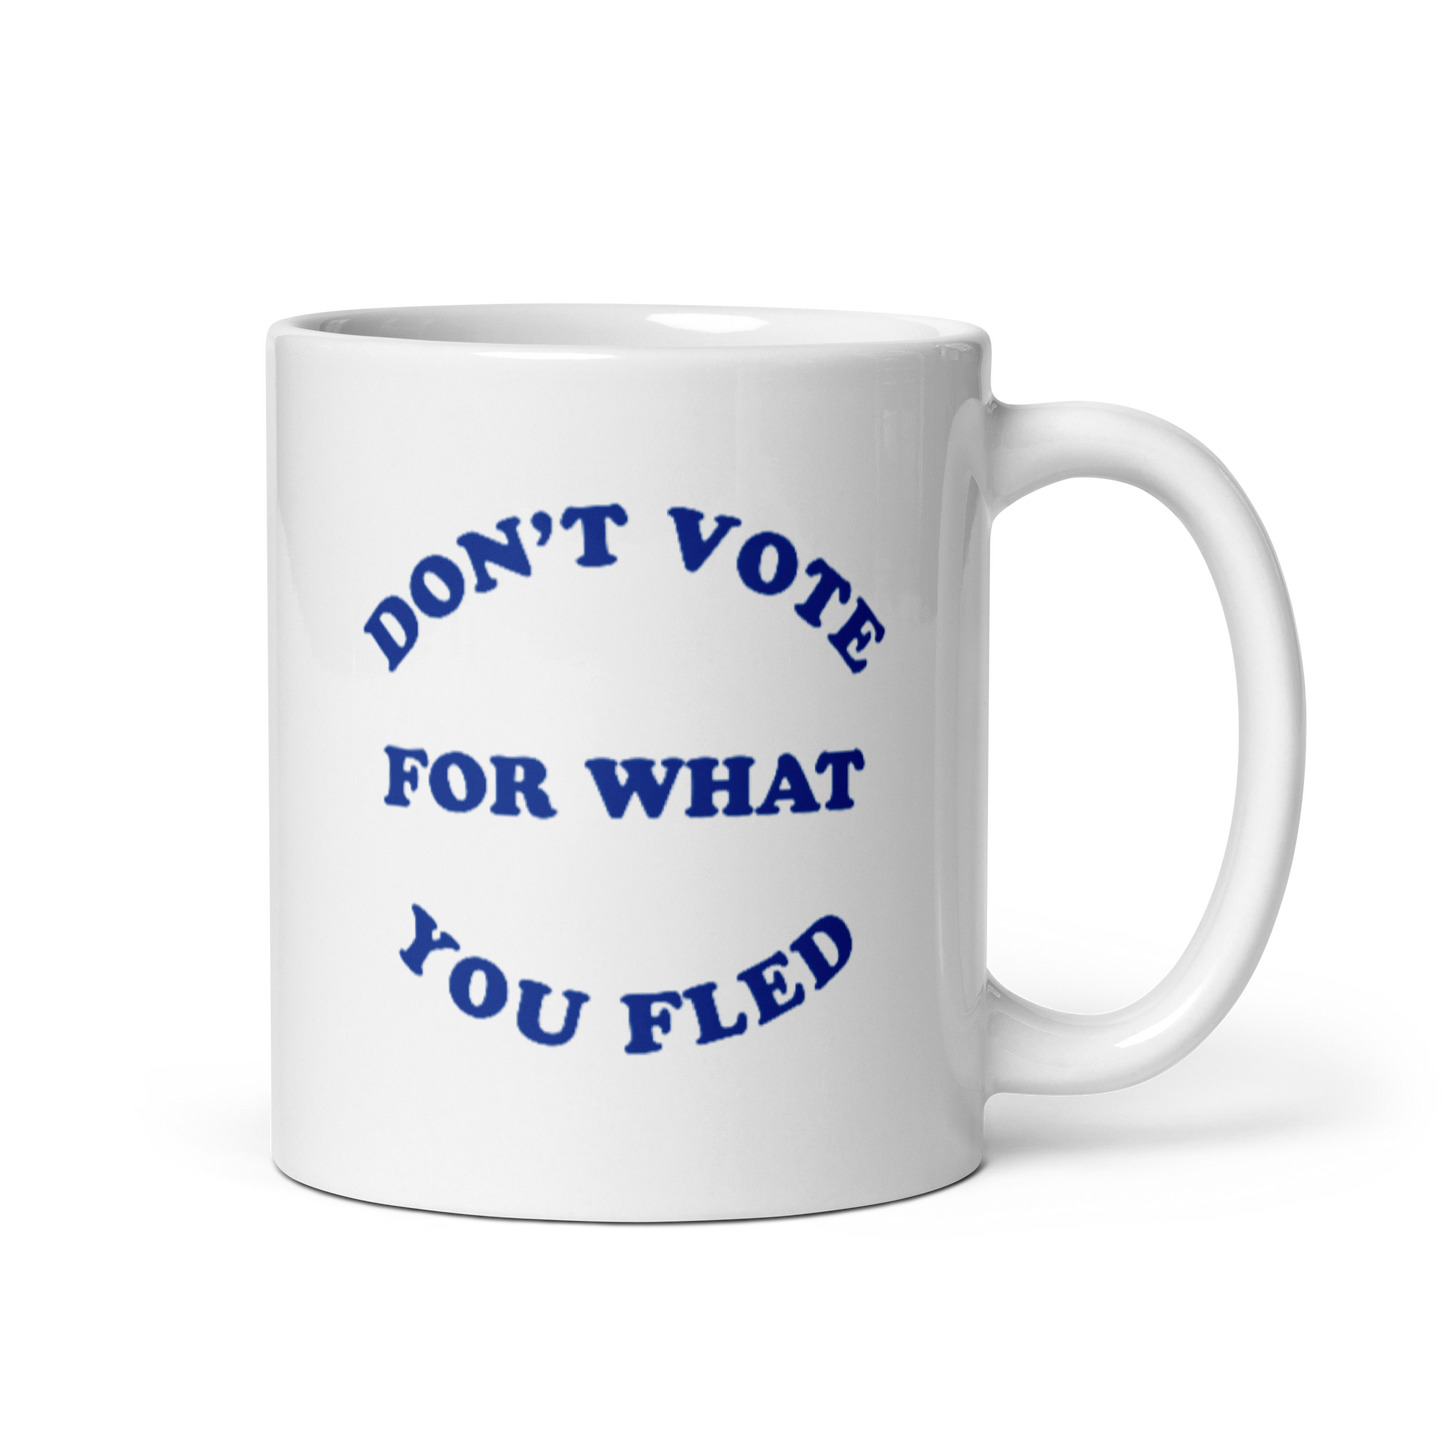 Don't Vote For What You Fled Mug